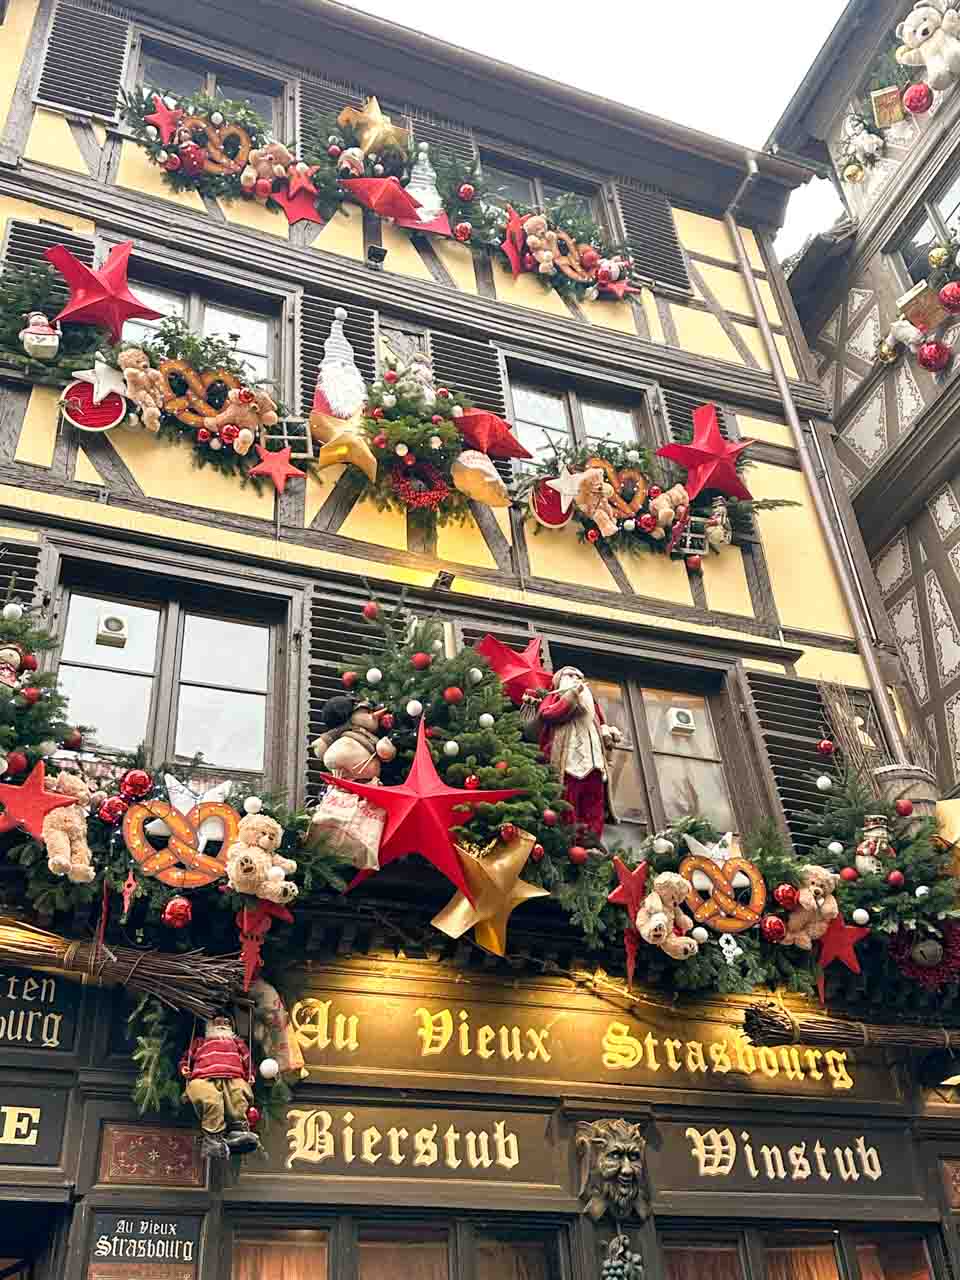 A traditional Strasbourg eatery, Au Vieux Strasbourg, adorned with Christmas wreaths and stars